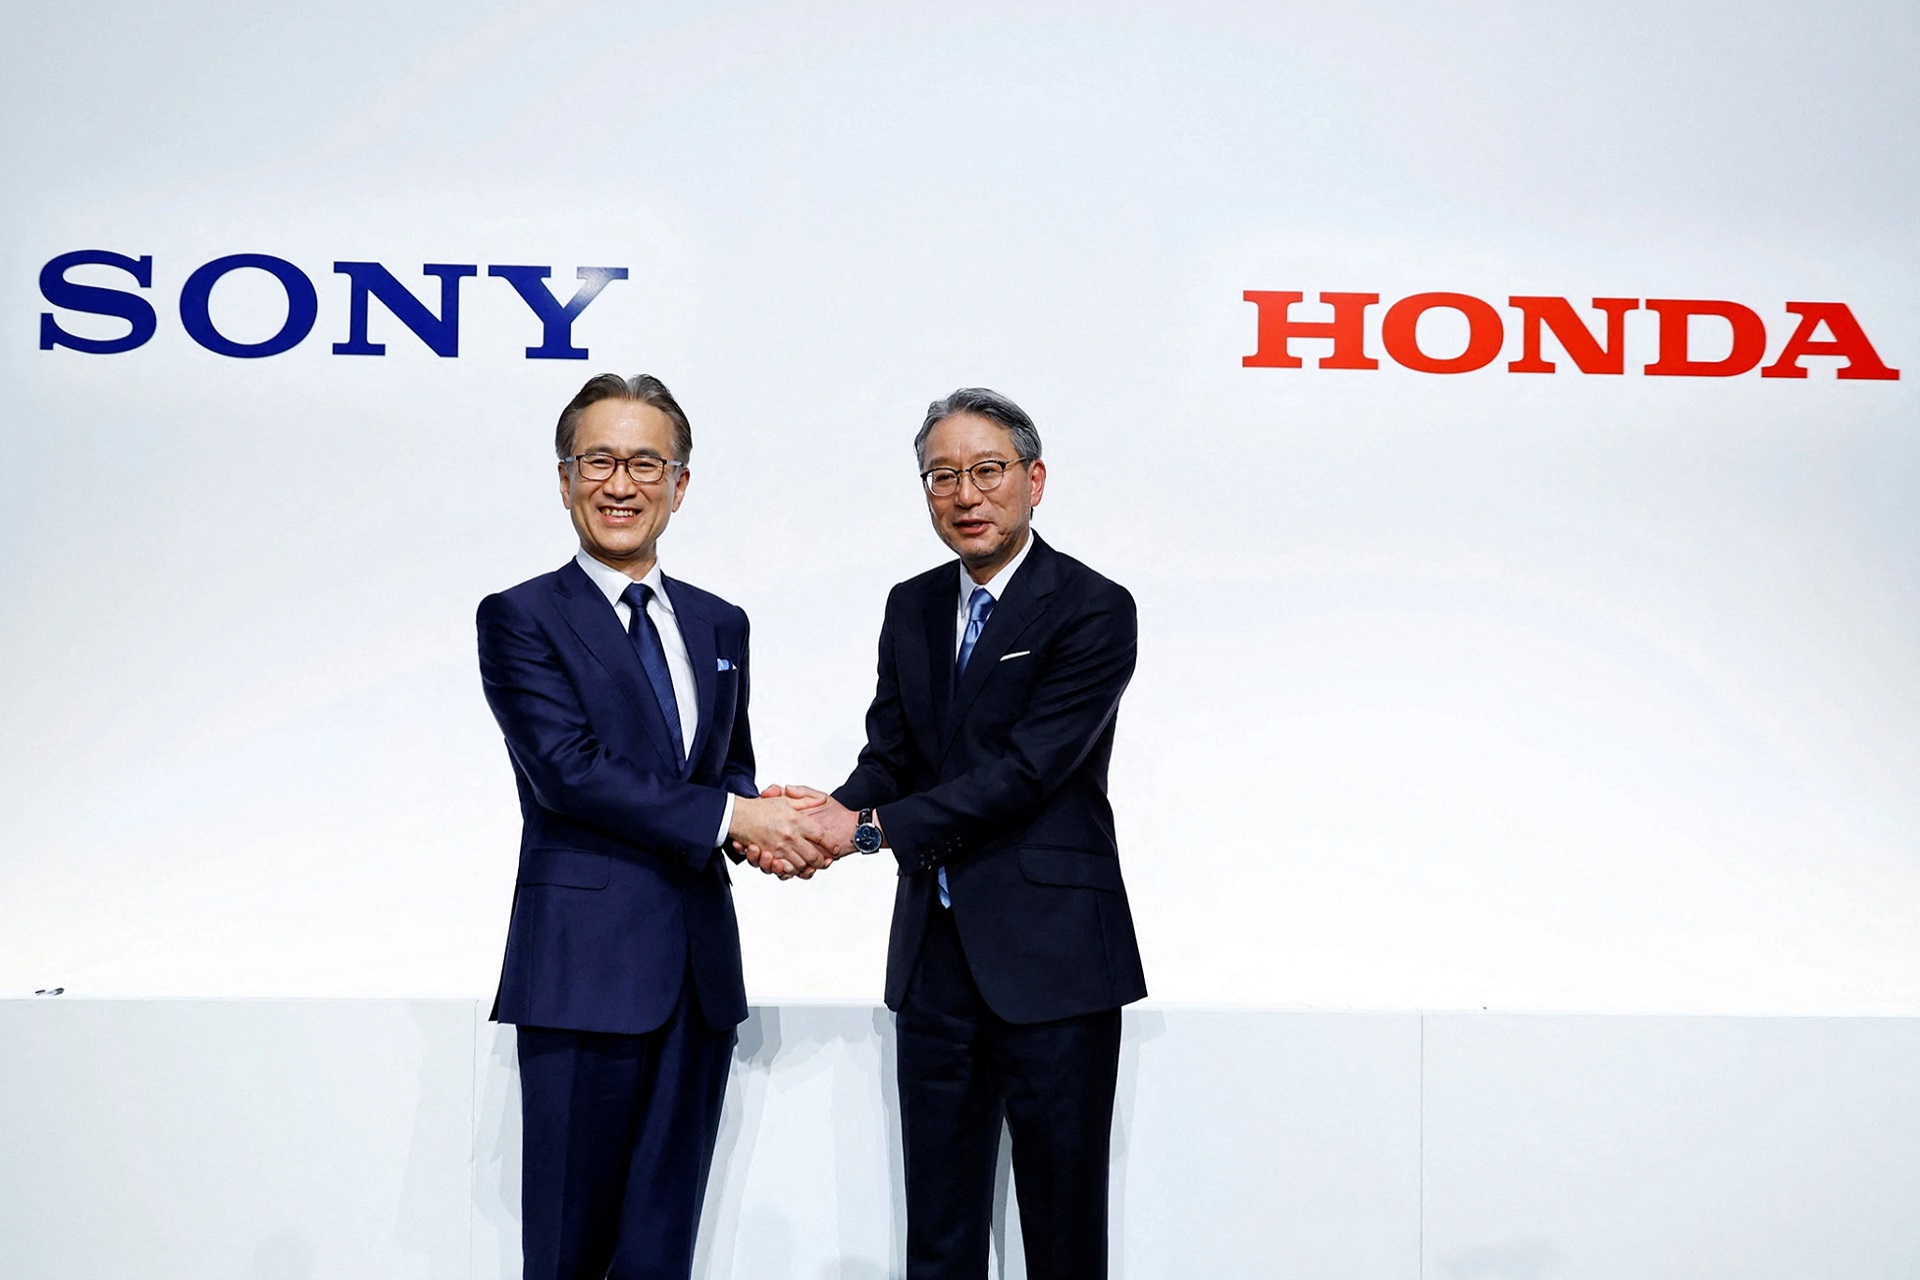 Sony & Honda Announce Partnership, First Electric Vehicle To Arrive In 2025